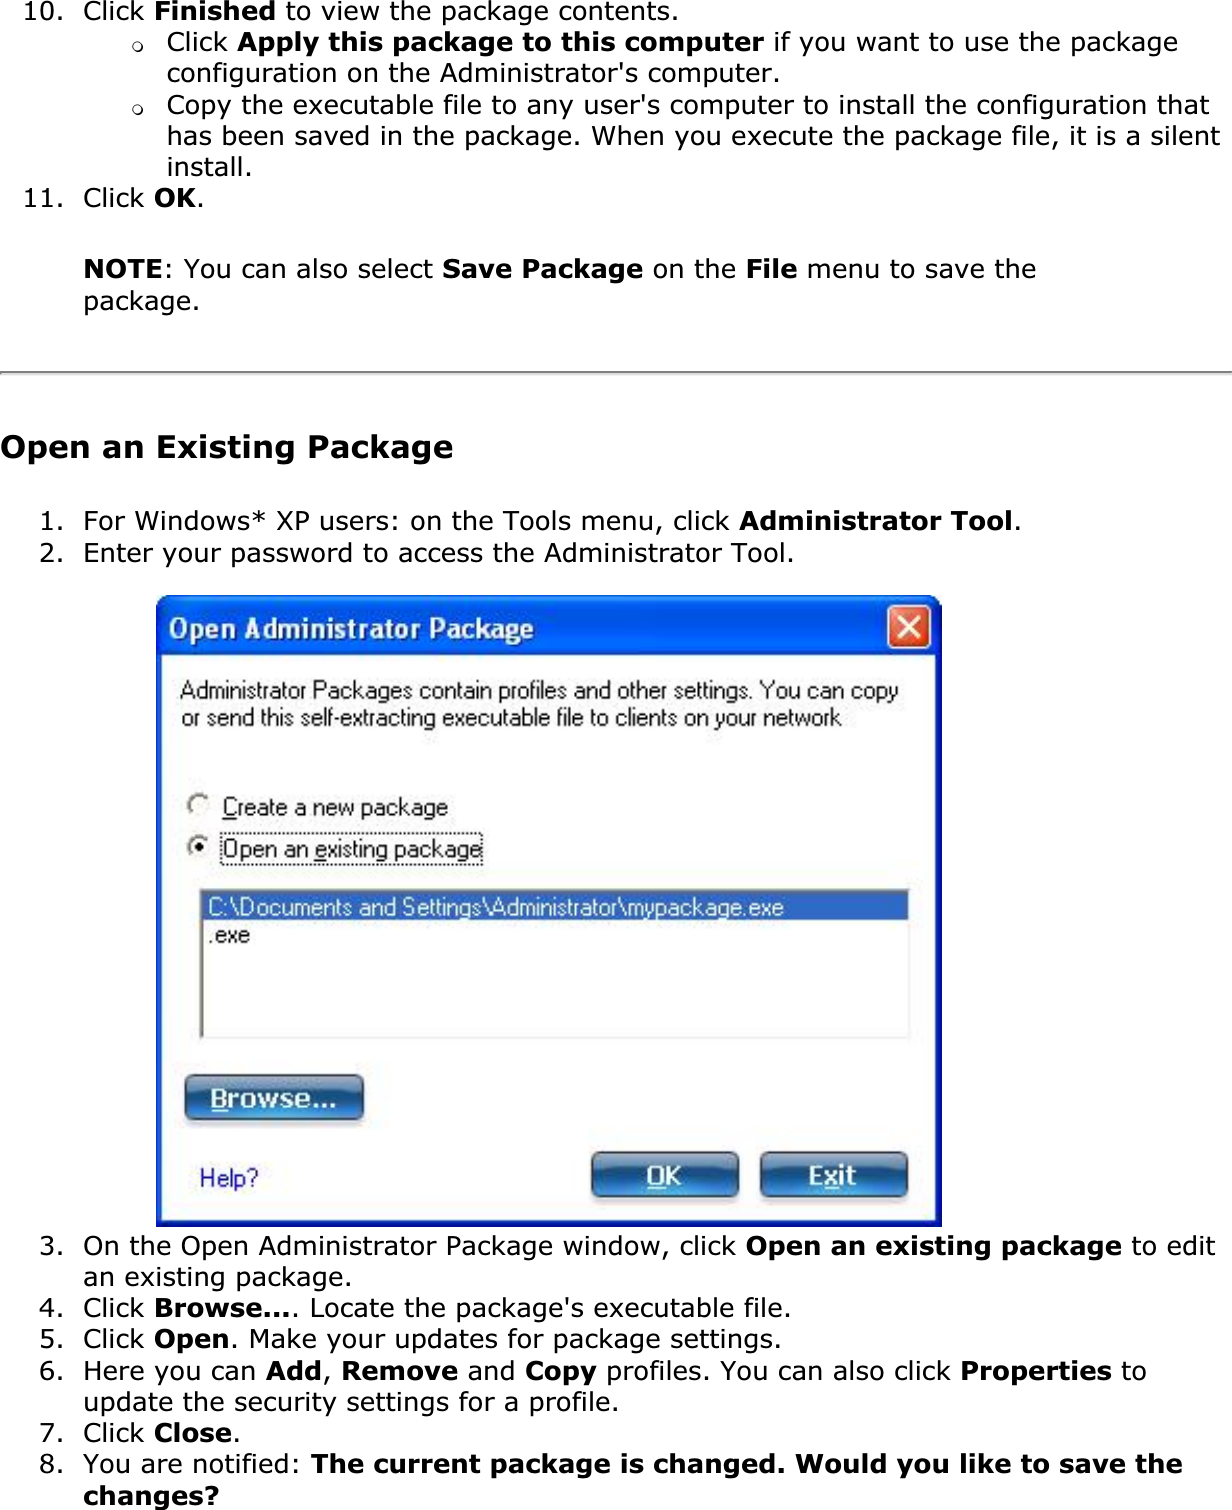 10. Click Finished to view the package contents. ❍Click Apply this package to this computer if you want to use the package configuration on the Administrator&apos;s computer.❍Copy the executable file to any user&apos;s computer to install the configuration that has been saved in the package. When you execute the package file, it is a silent install.11. Click OK.NOTE: You can also select Save Package on the File menu to save the package.Open an Existing Package1. For Windows* XP users: on the Tools menu, click Administrator Tool.2. Enter your password to access the Administrator Tool.3. On the Open Administrator Package window, click Open an existing package to edit an existing package.4. Click Browse.... Locate the package&apos;s executable file.5. Click Open. Make your updates for package settings.6. Here you can Add,Remove and Copy profiles. You can also click Properties to update the security settings for a profile.7. Click Close.8. You are notified: The current package is changed. Would you like to save the changes?